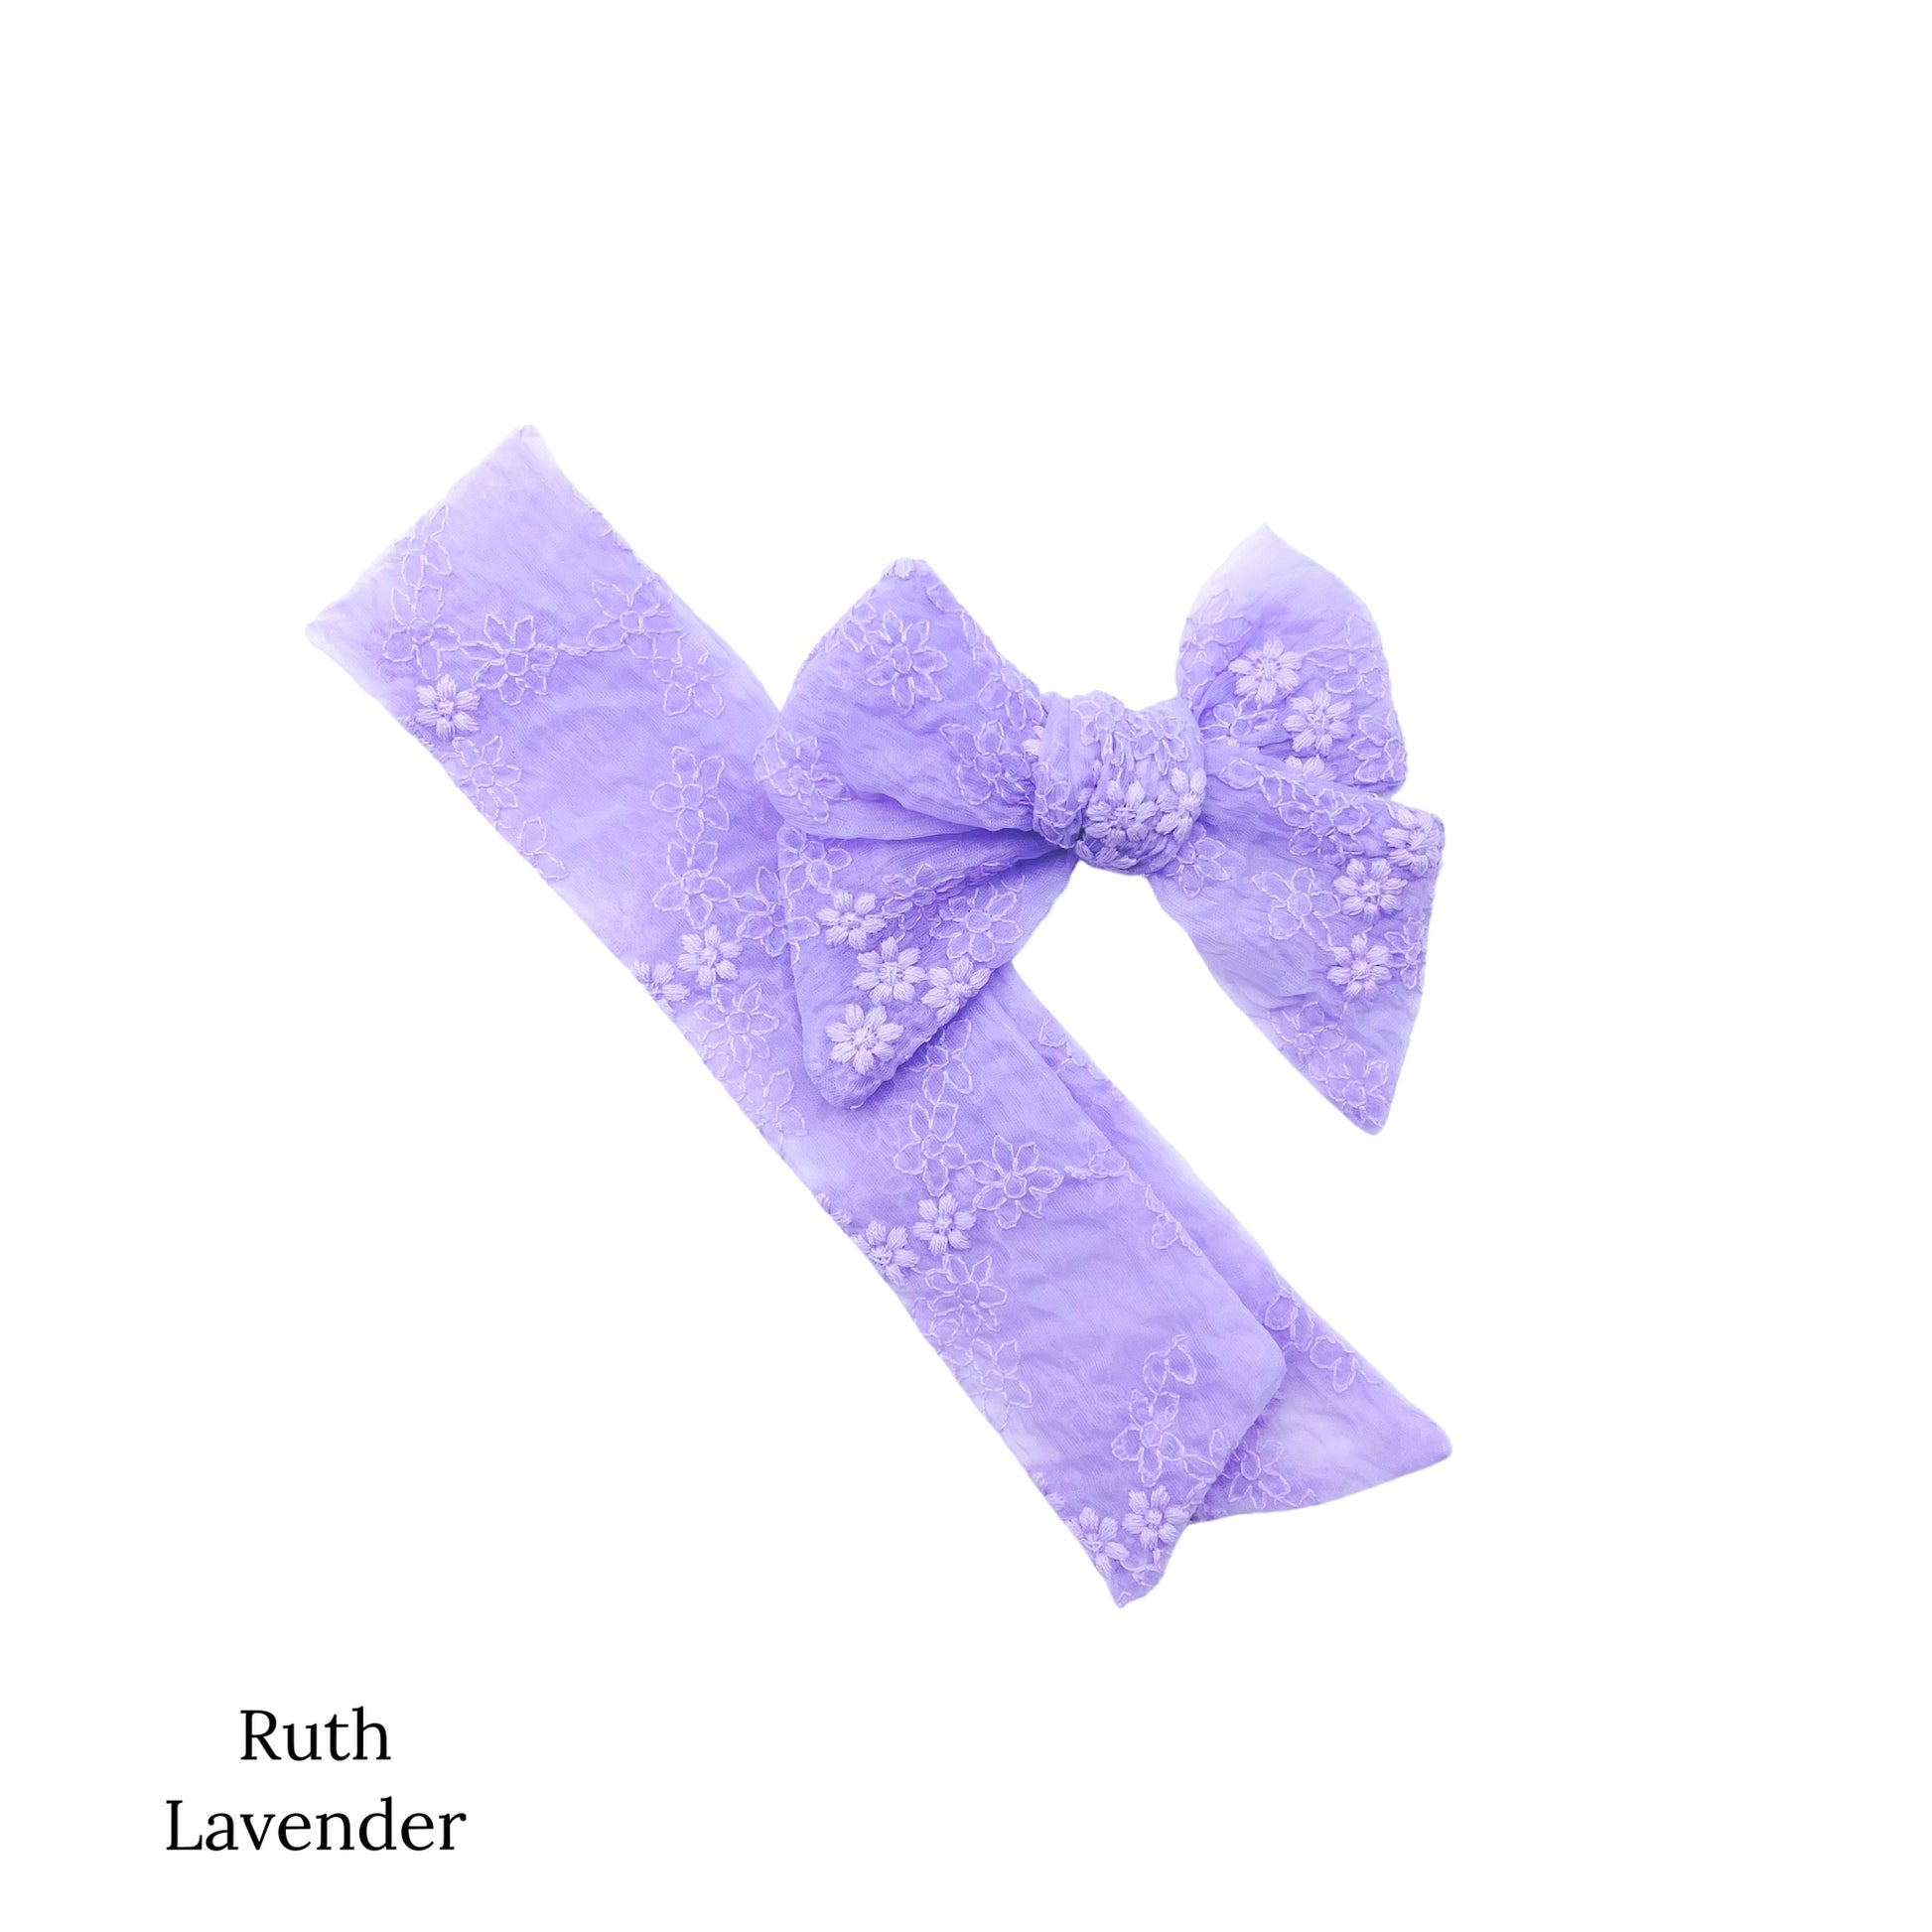 Meadow floral organza bow strips. Lavender colored sailor bow strip.